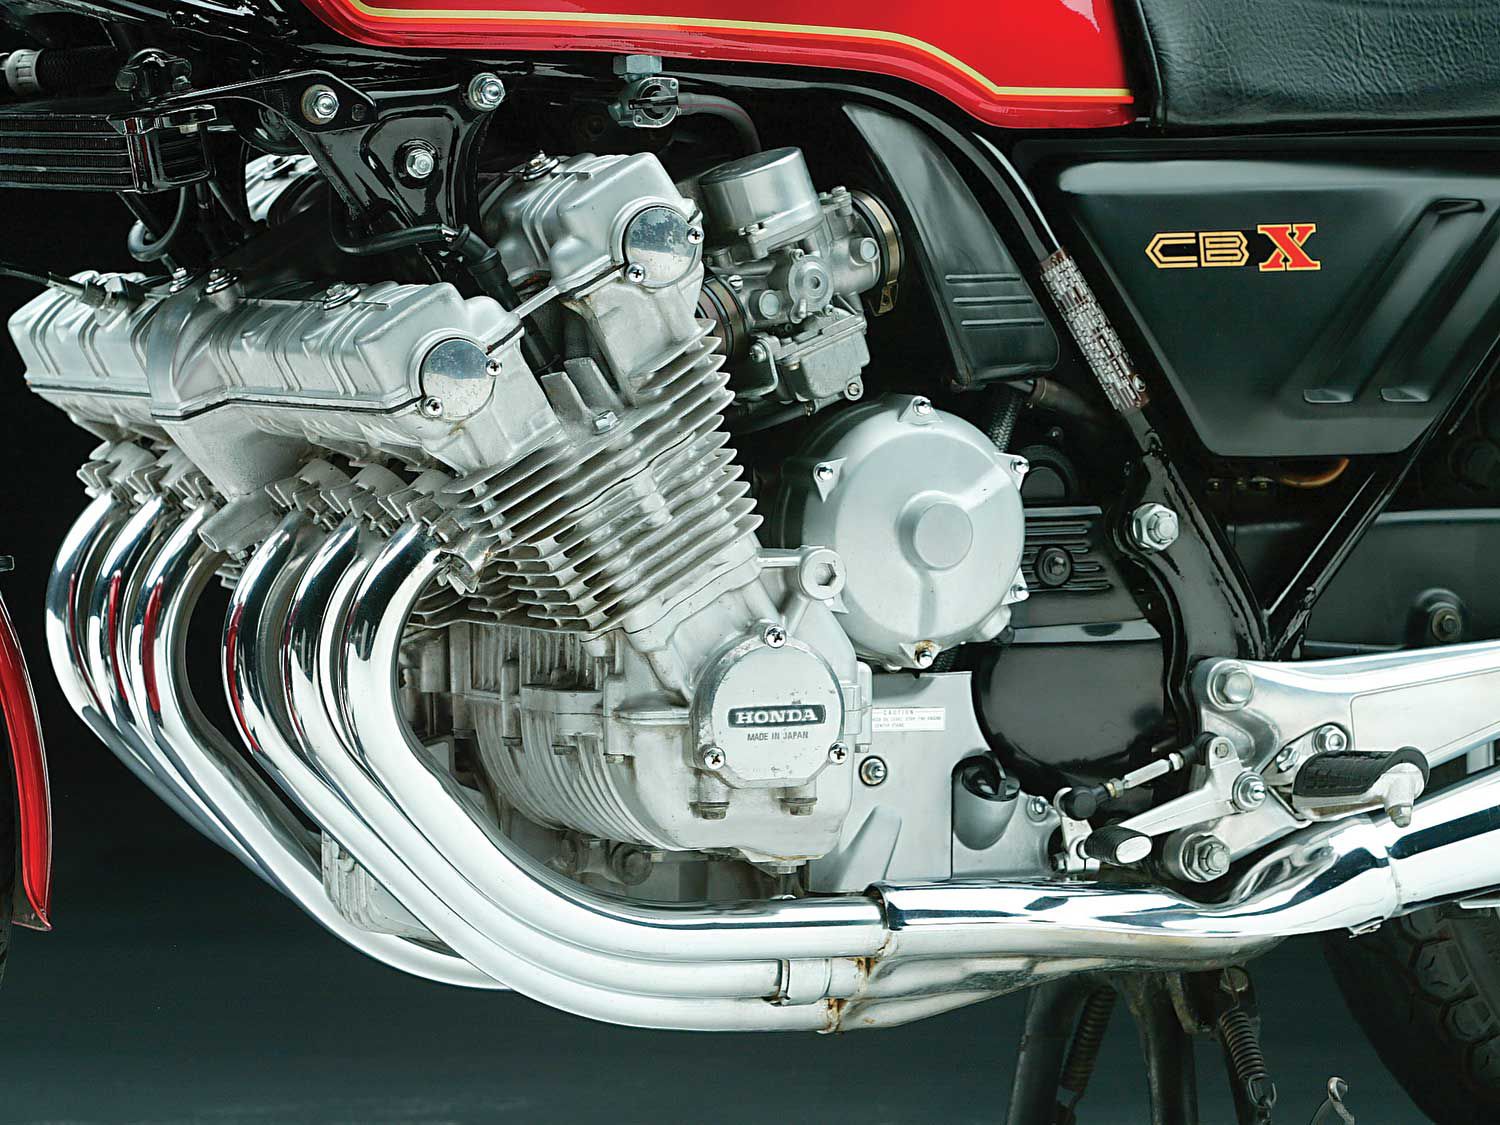 The Honda CBX was too much motorcycle for its own good 